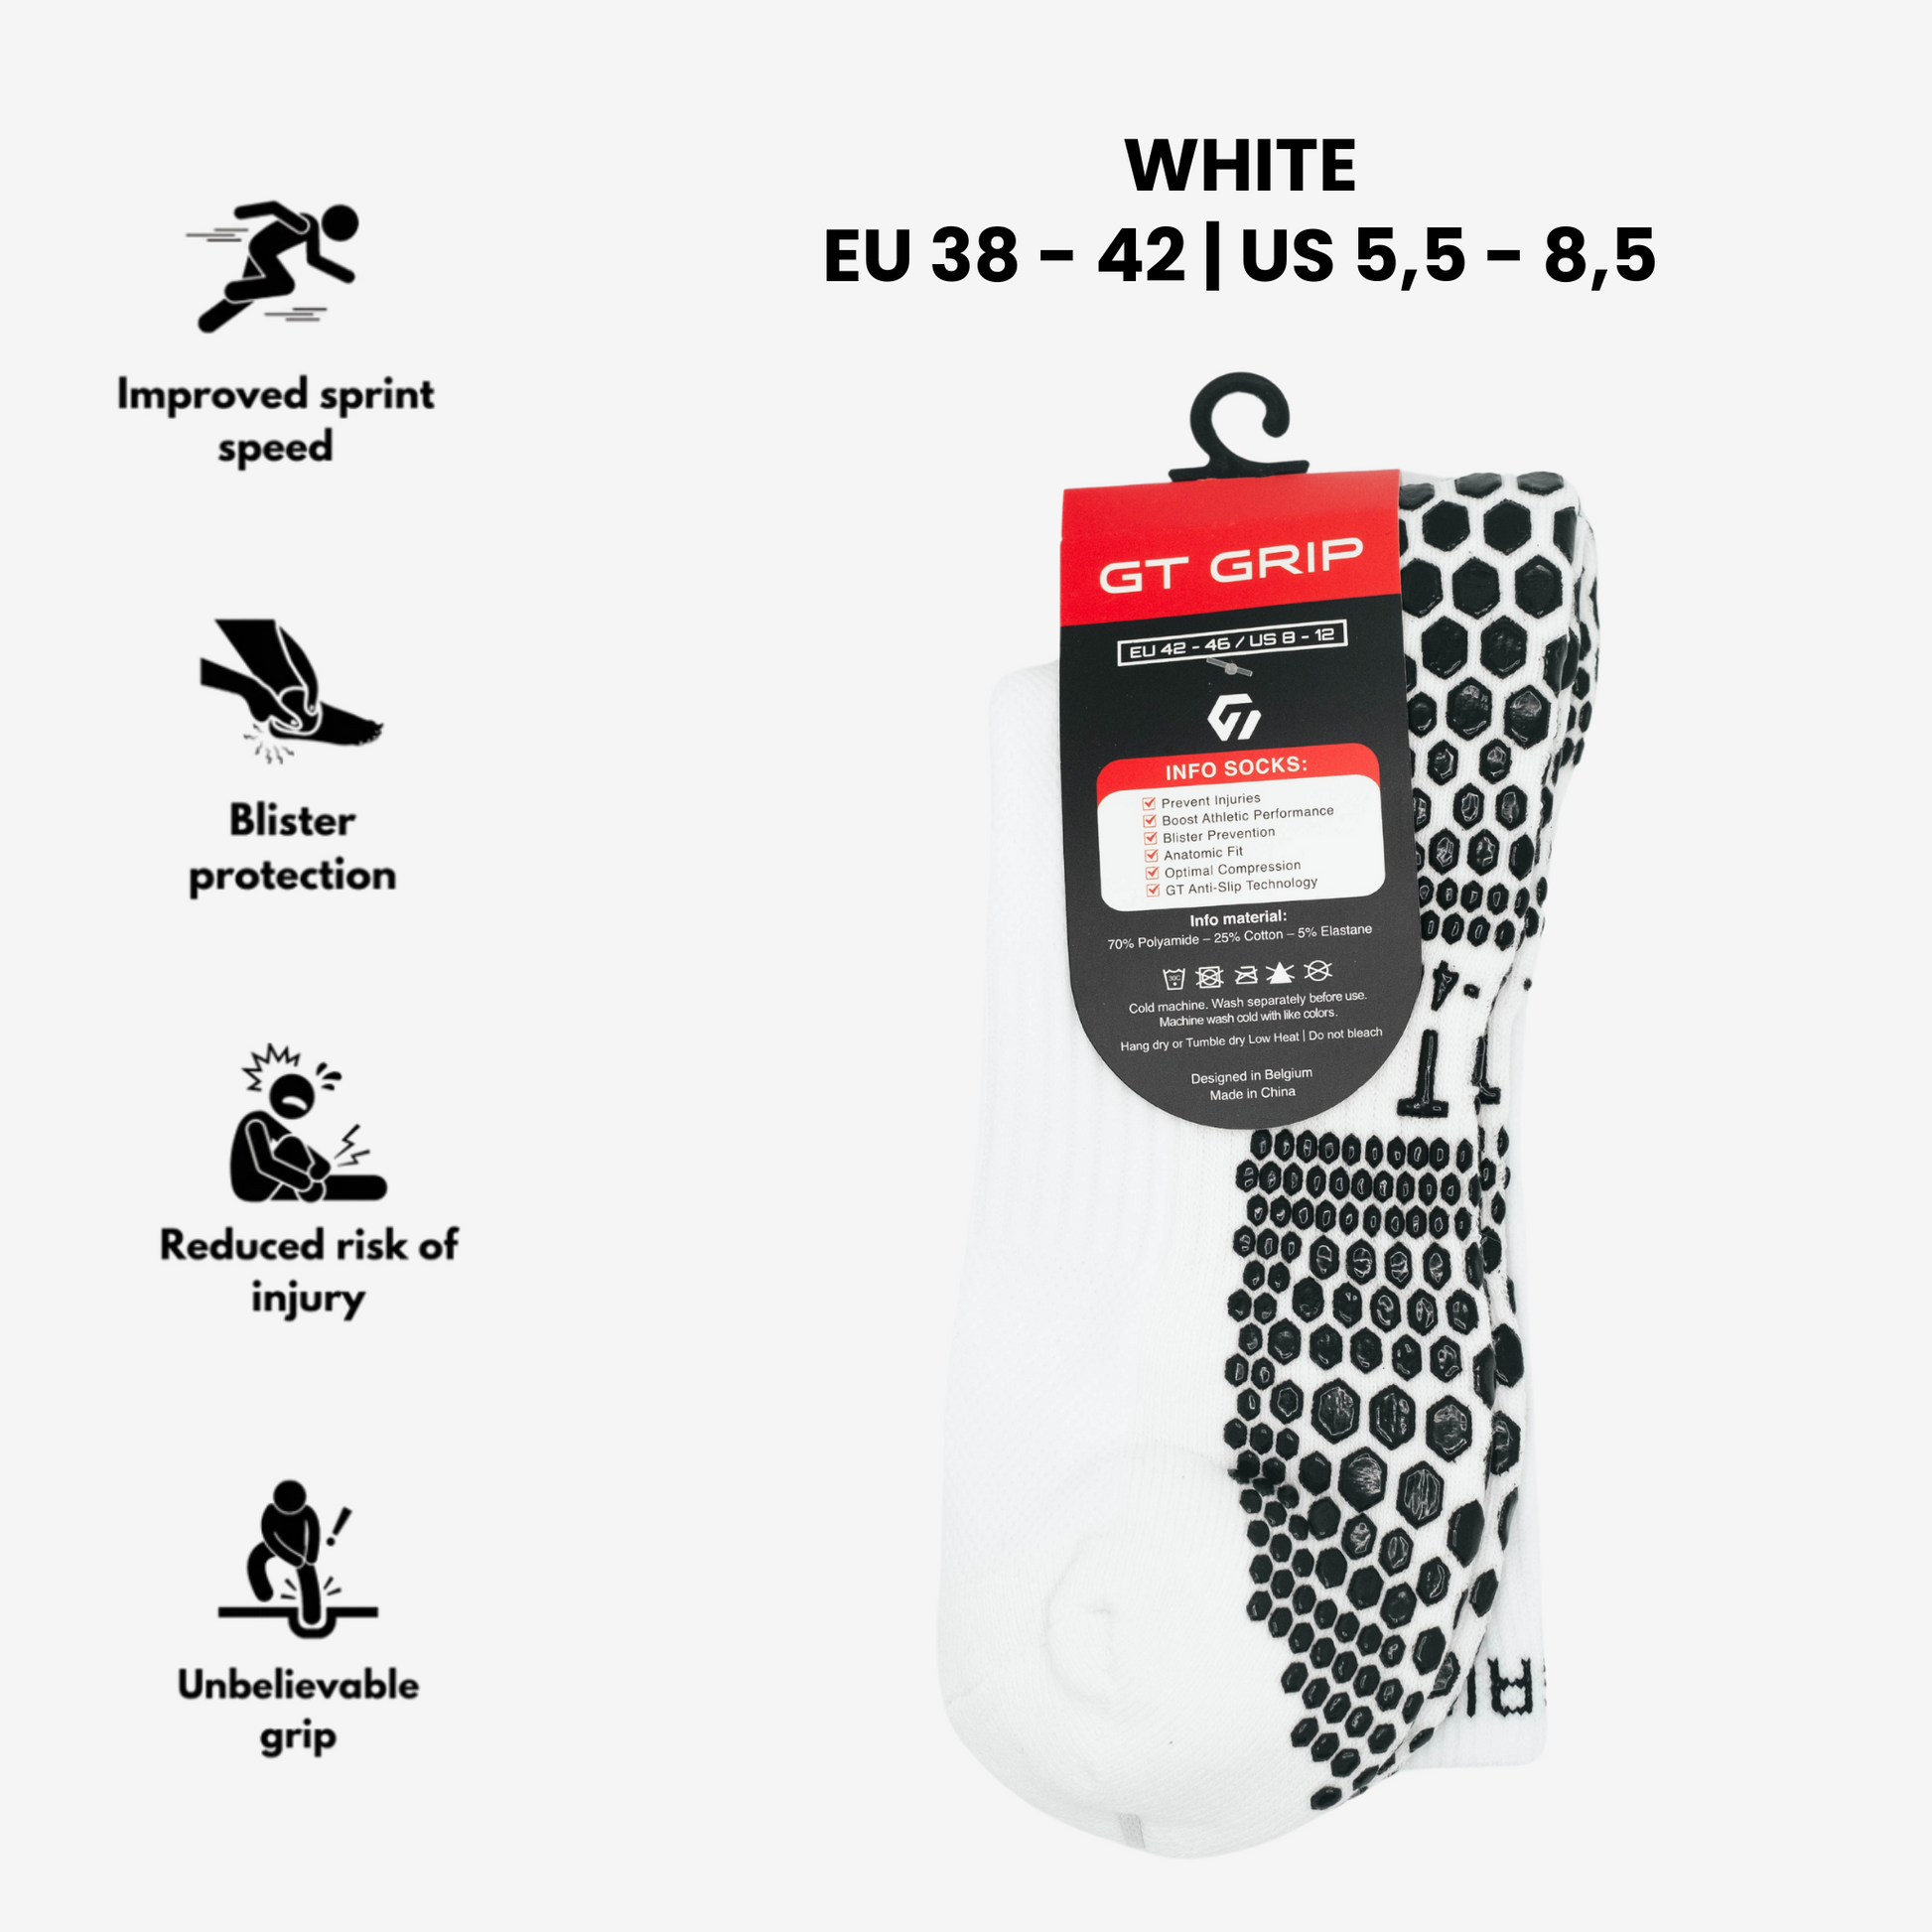 GT GRIP White Performance Socks - Grip Socks - Size EU 38-42 | US 5.5-8.5 for Superior Stability, Anti-Blister Comfort, and Enhanced Traction